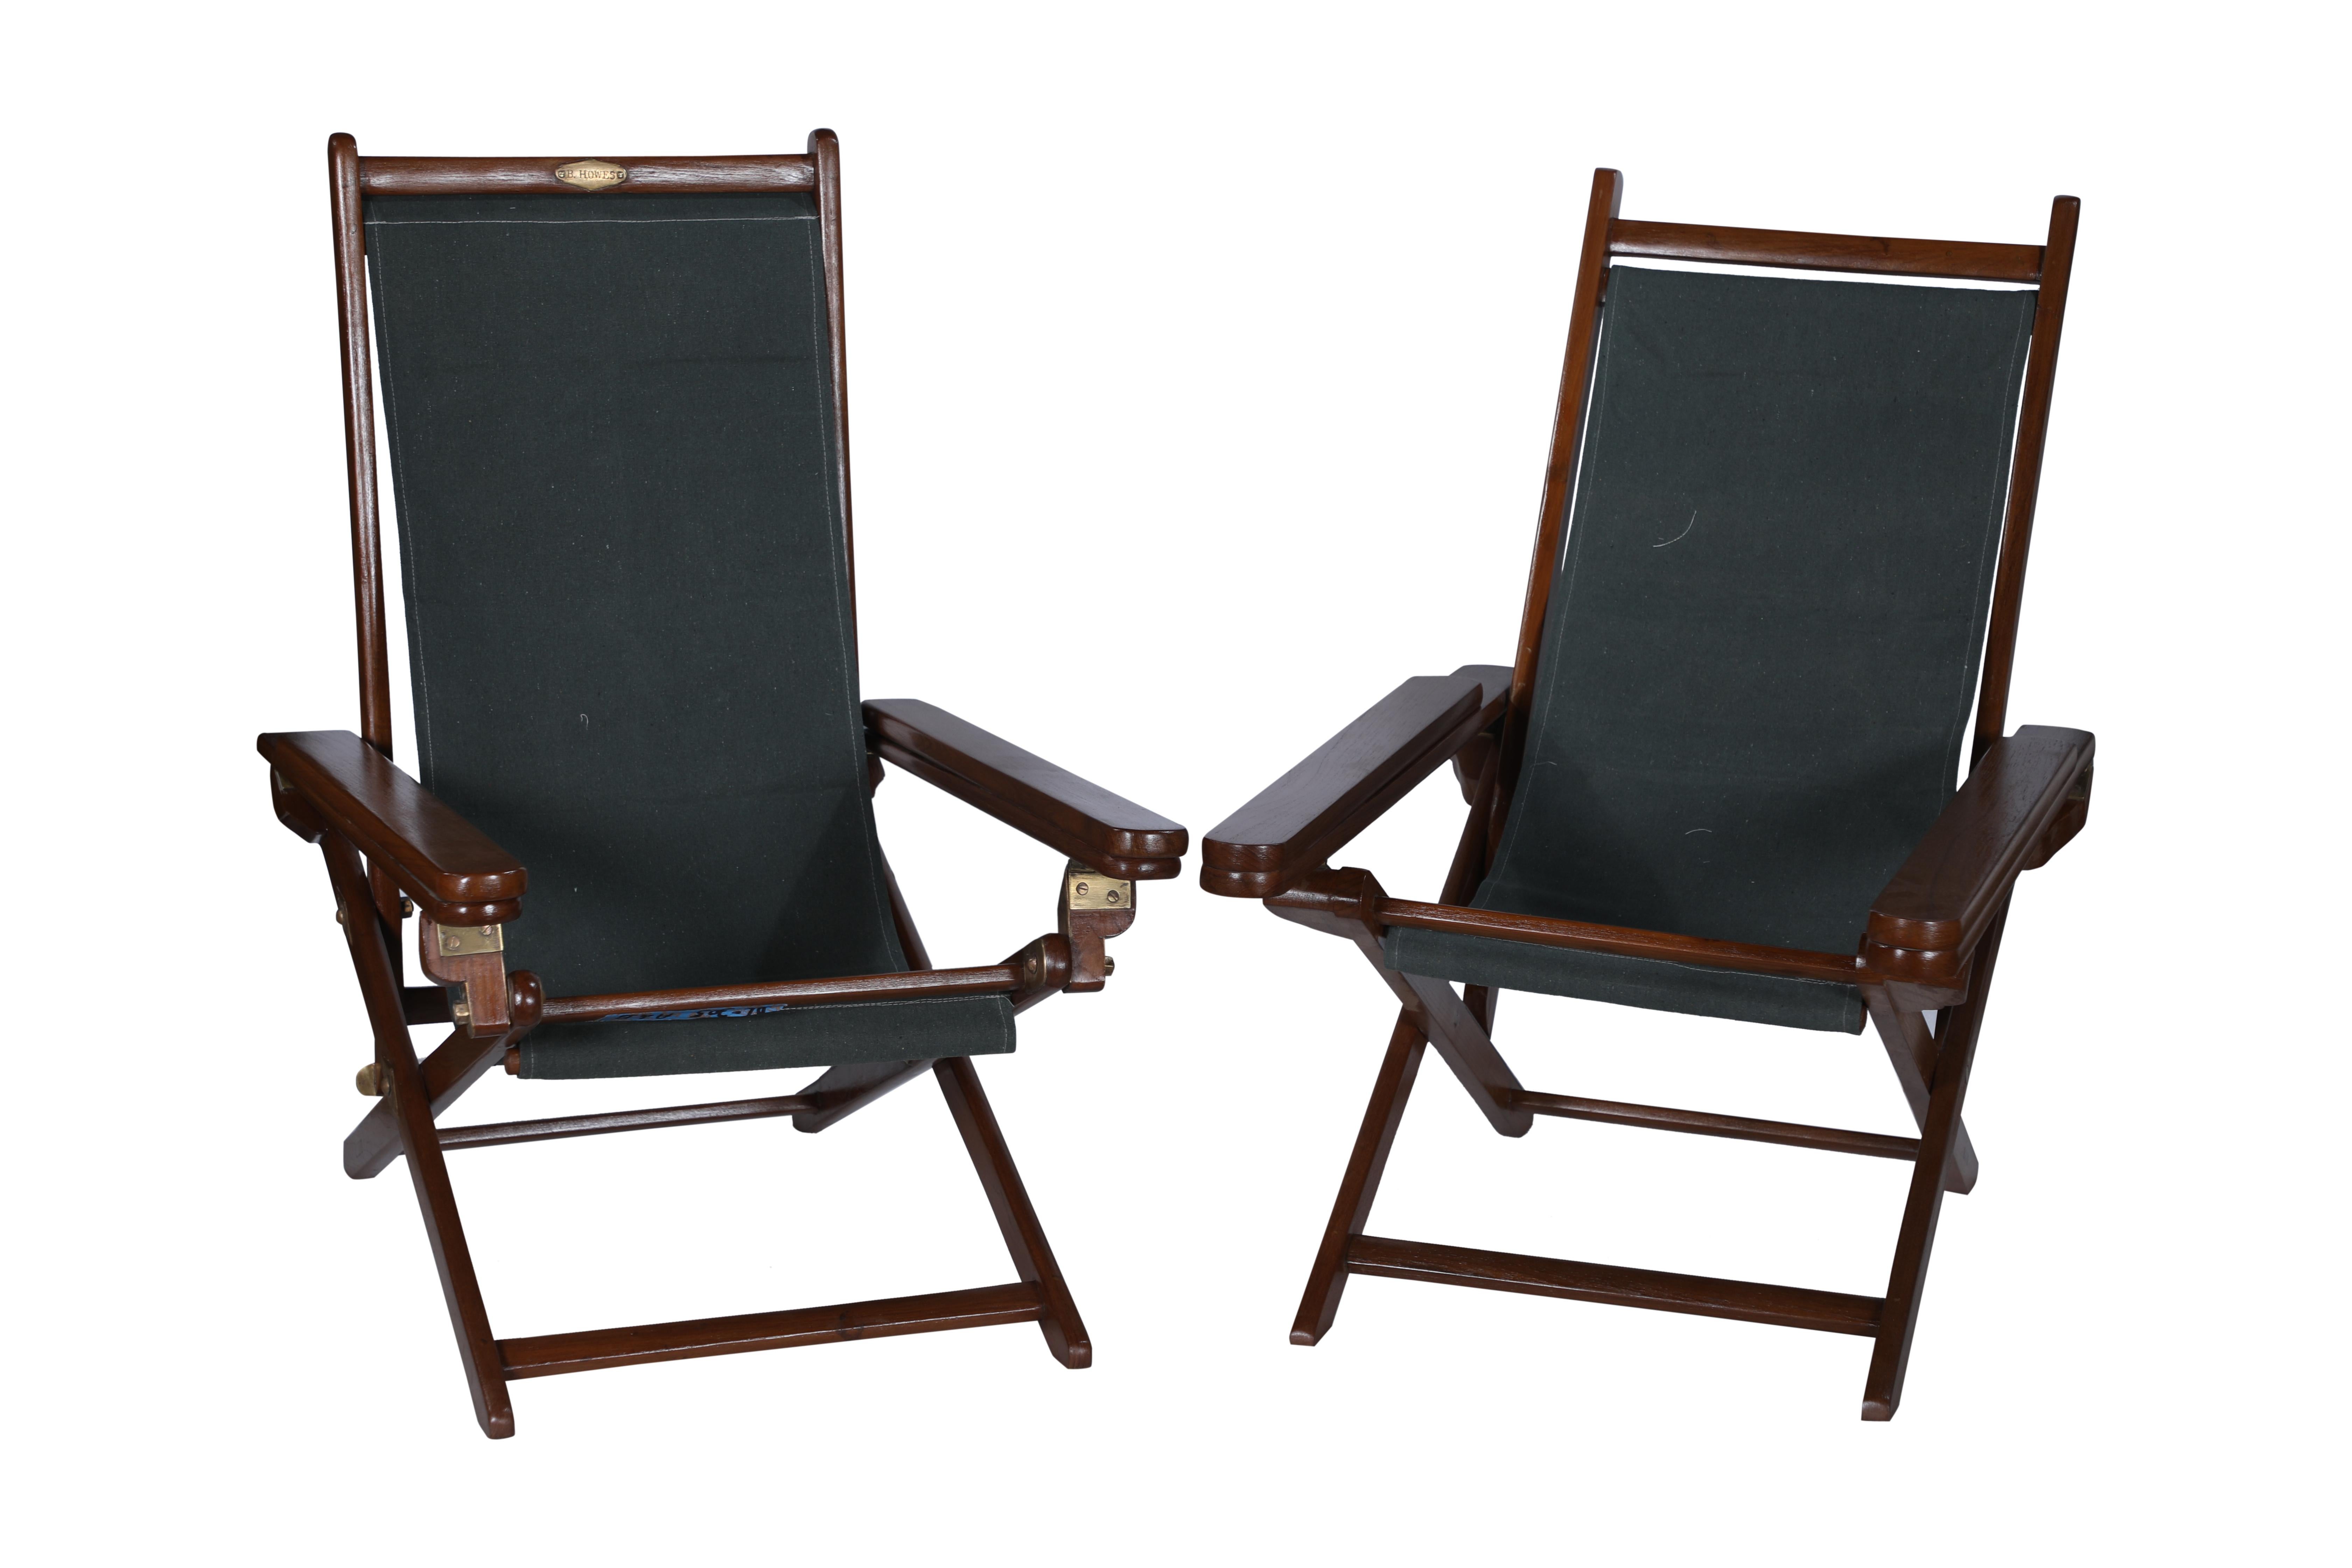 Pair of Canvas Sling-Back Campaign Folding, Adjustable Teak Chairs w/ Leg Rests 1